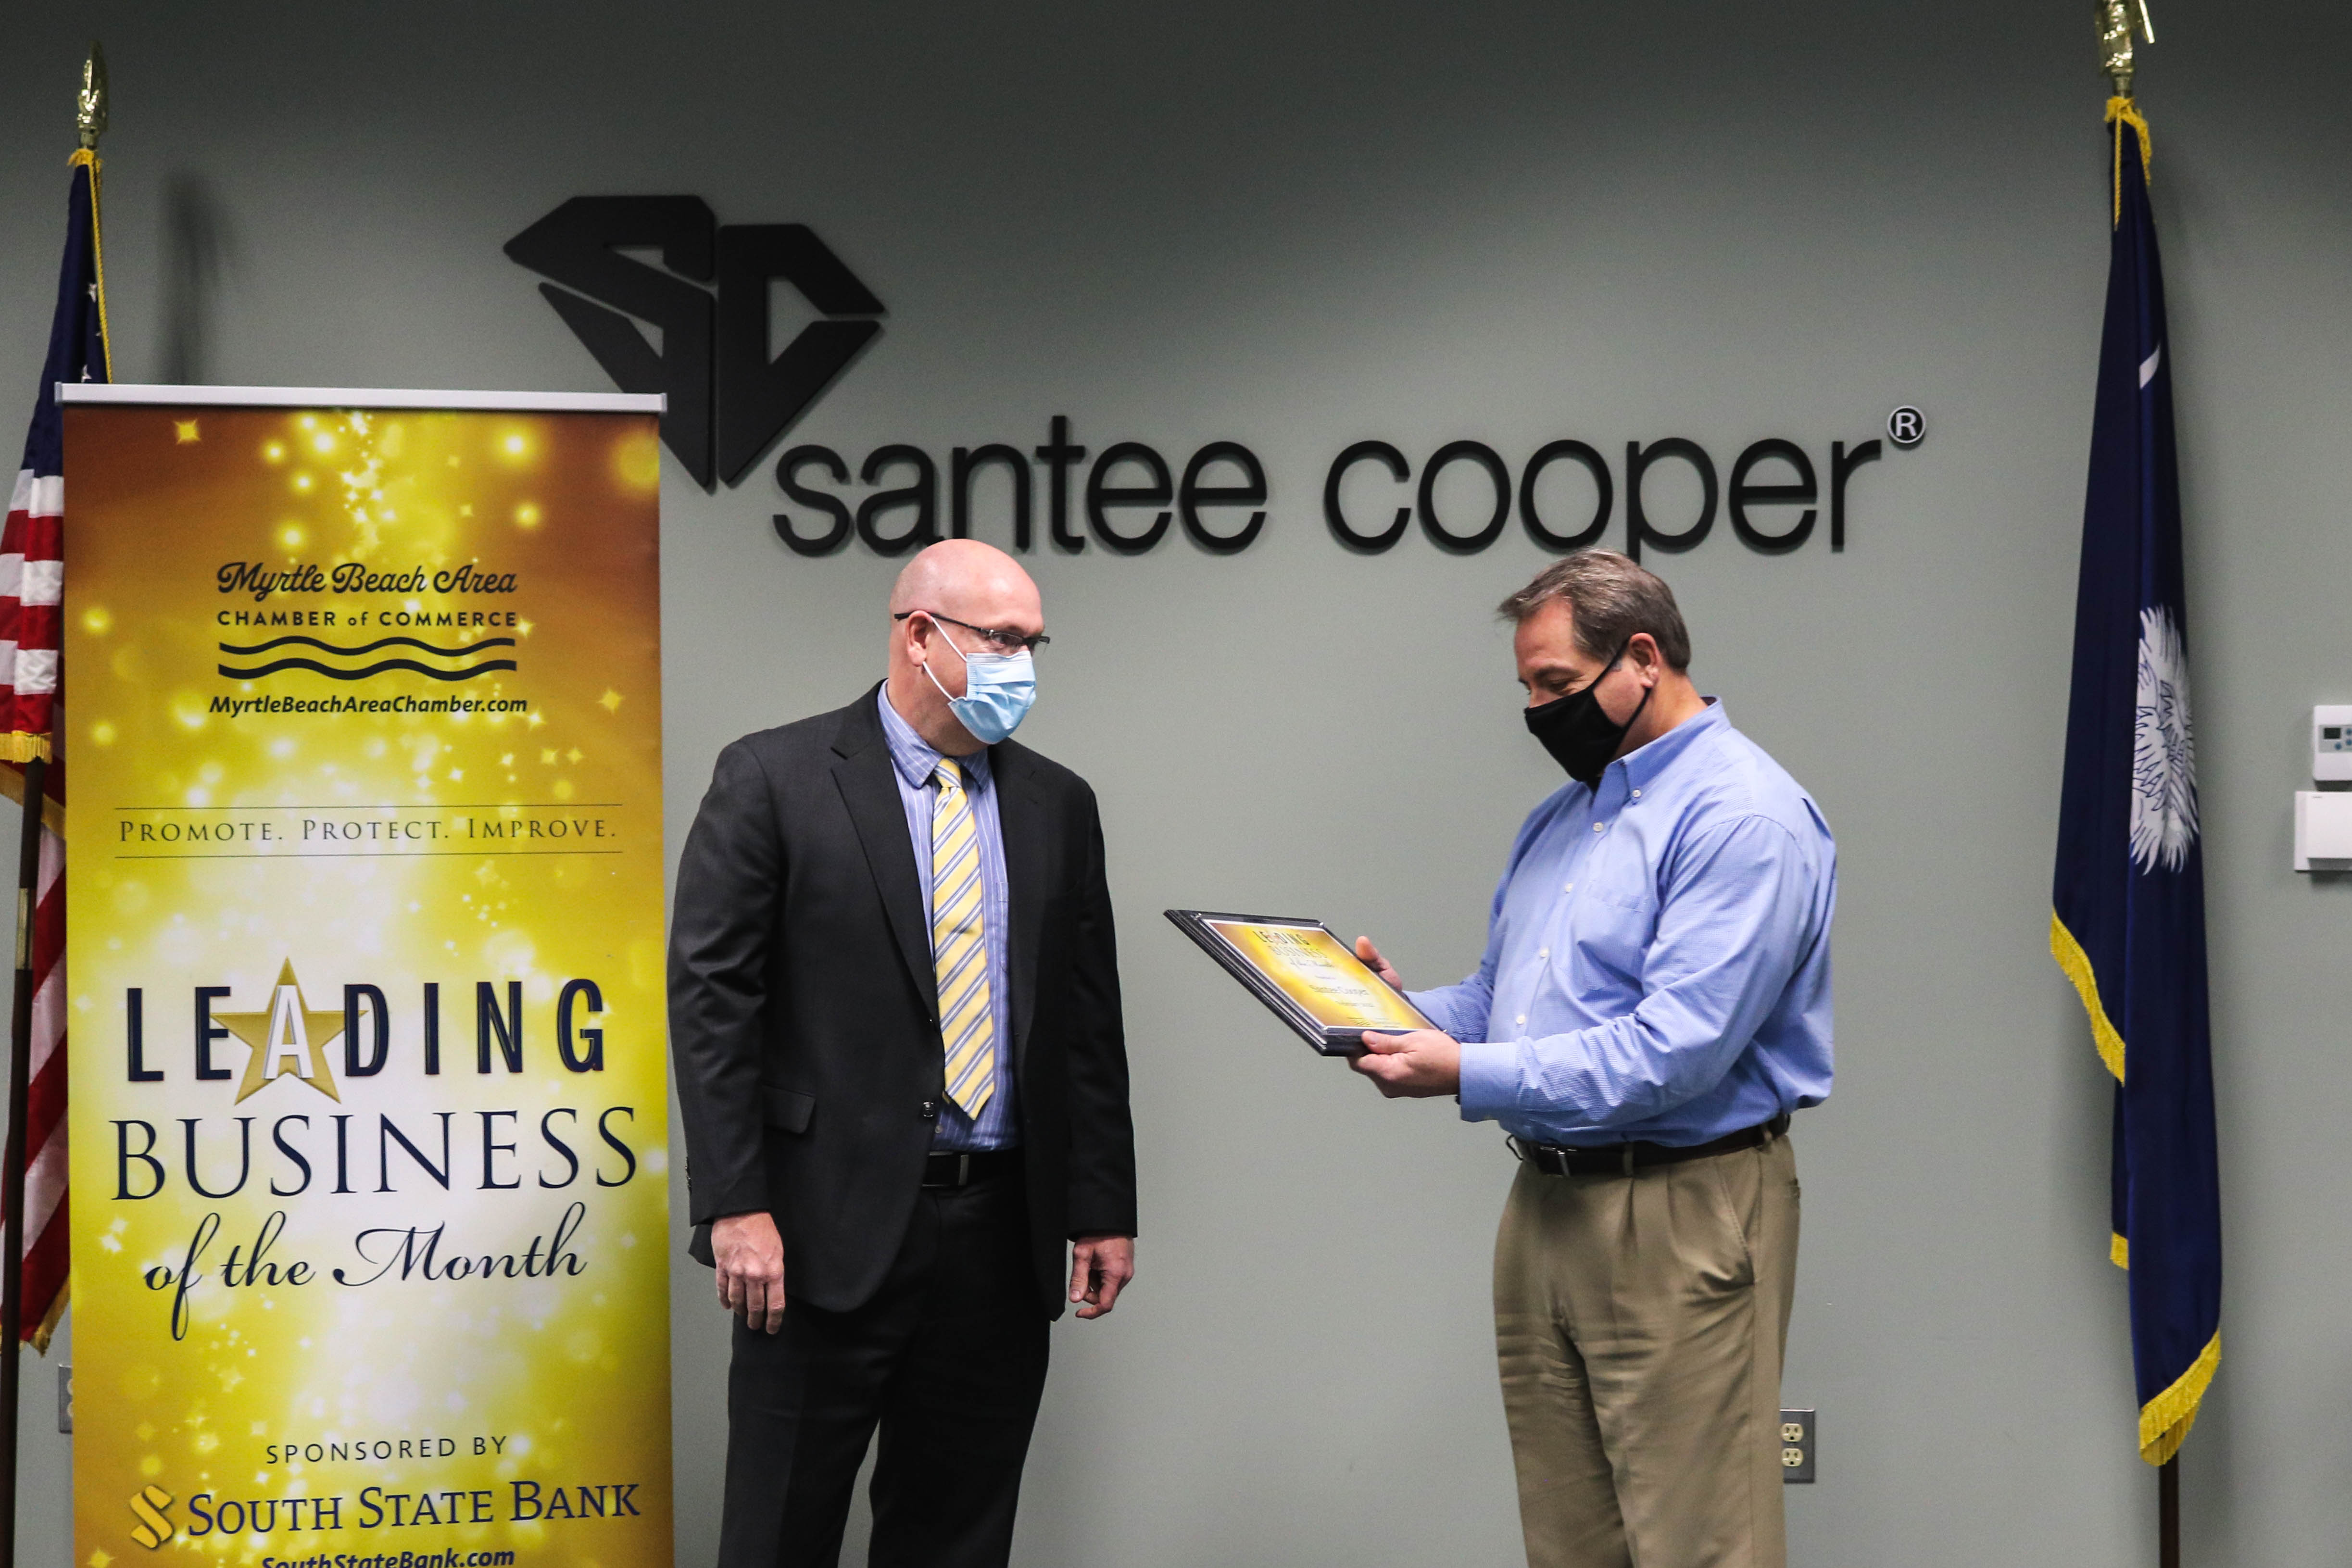 brian lewis with santee cooper receives award plaque from south state bank